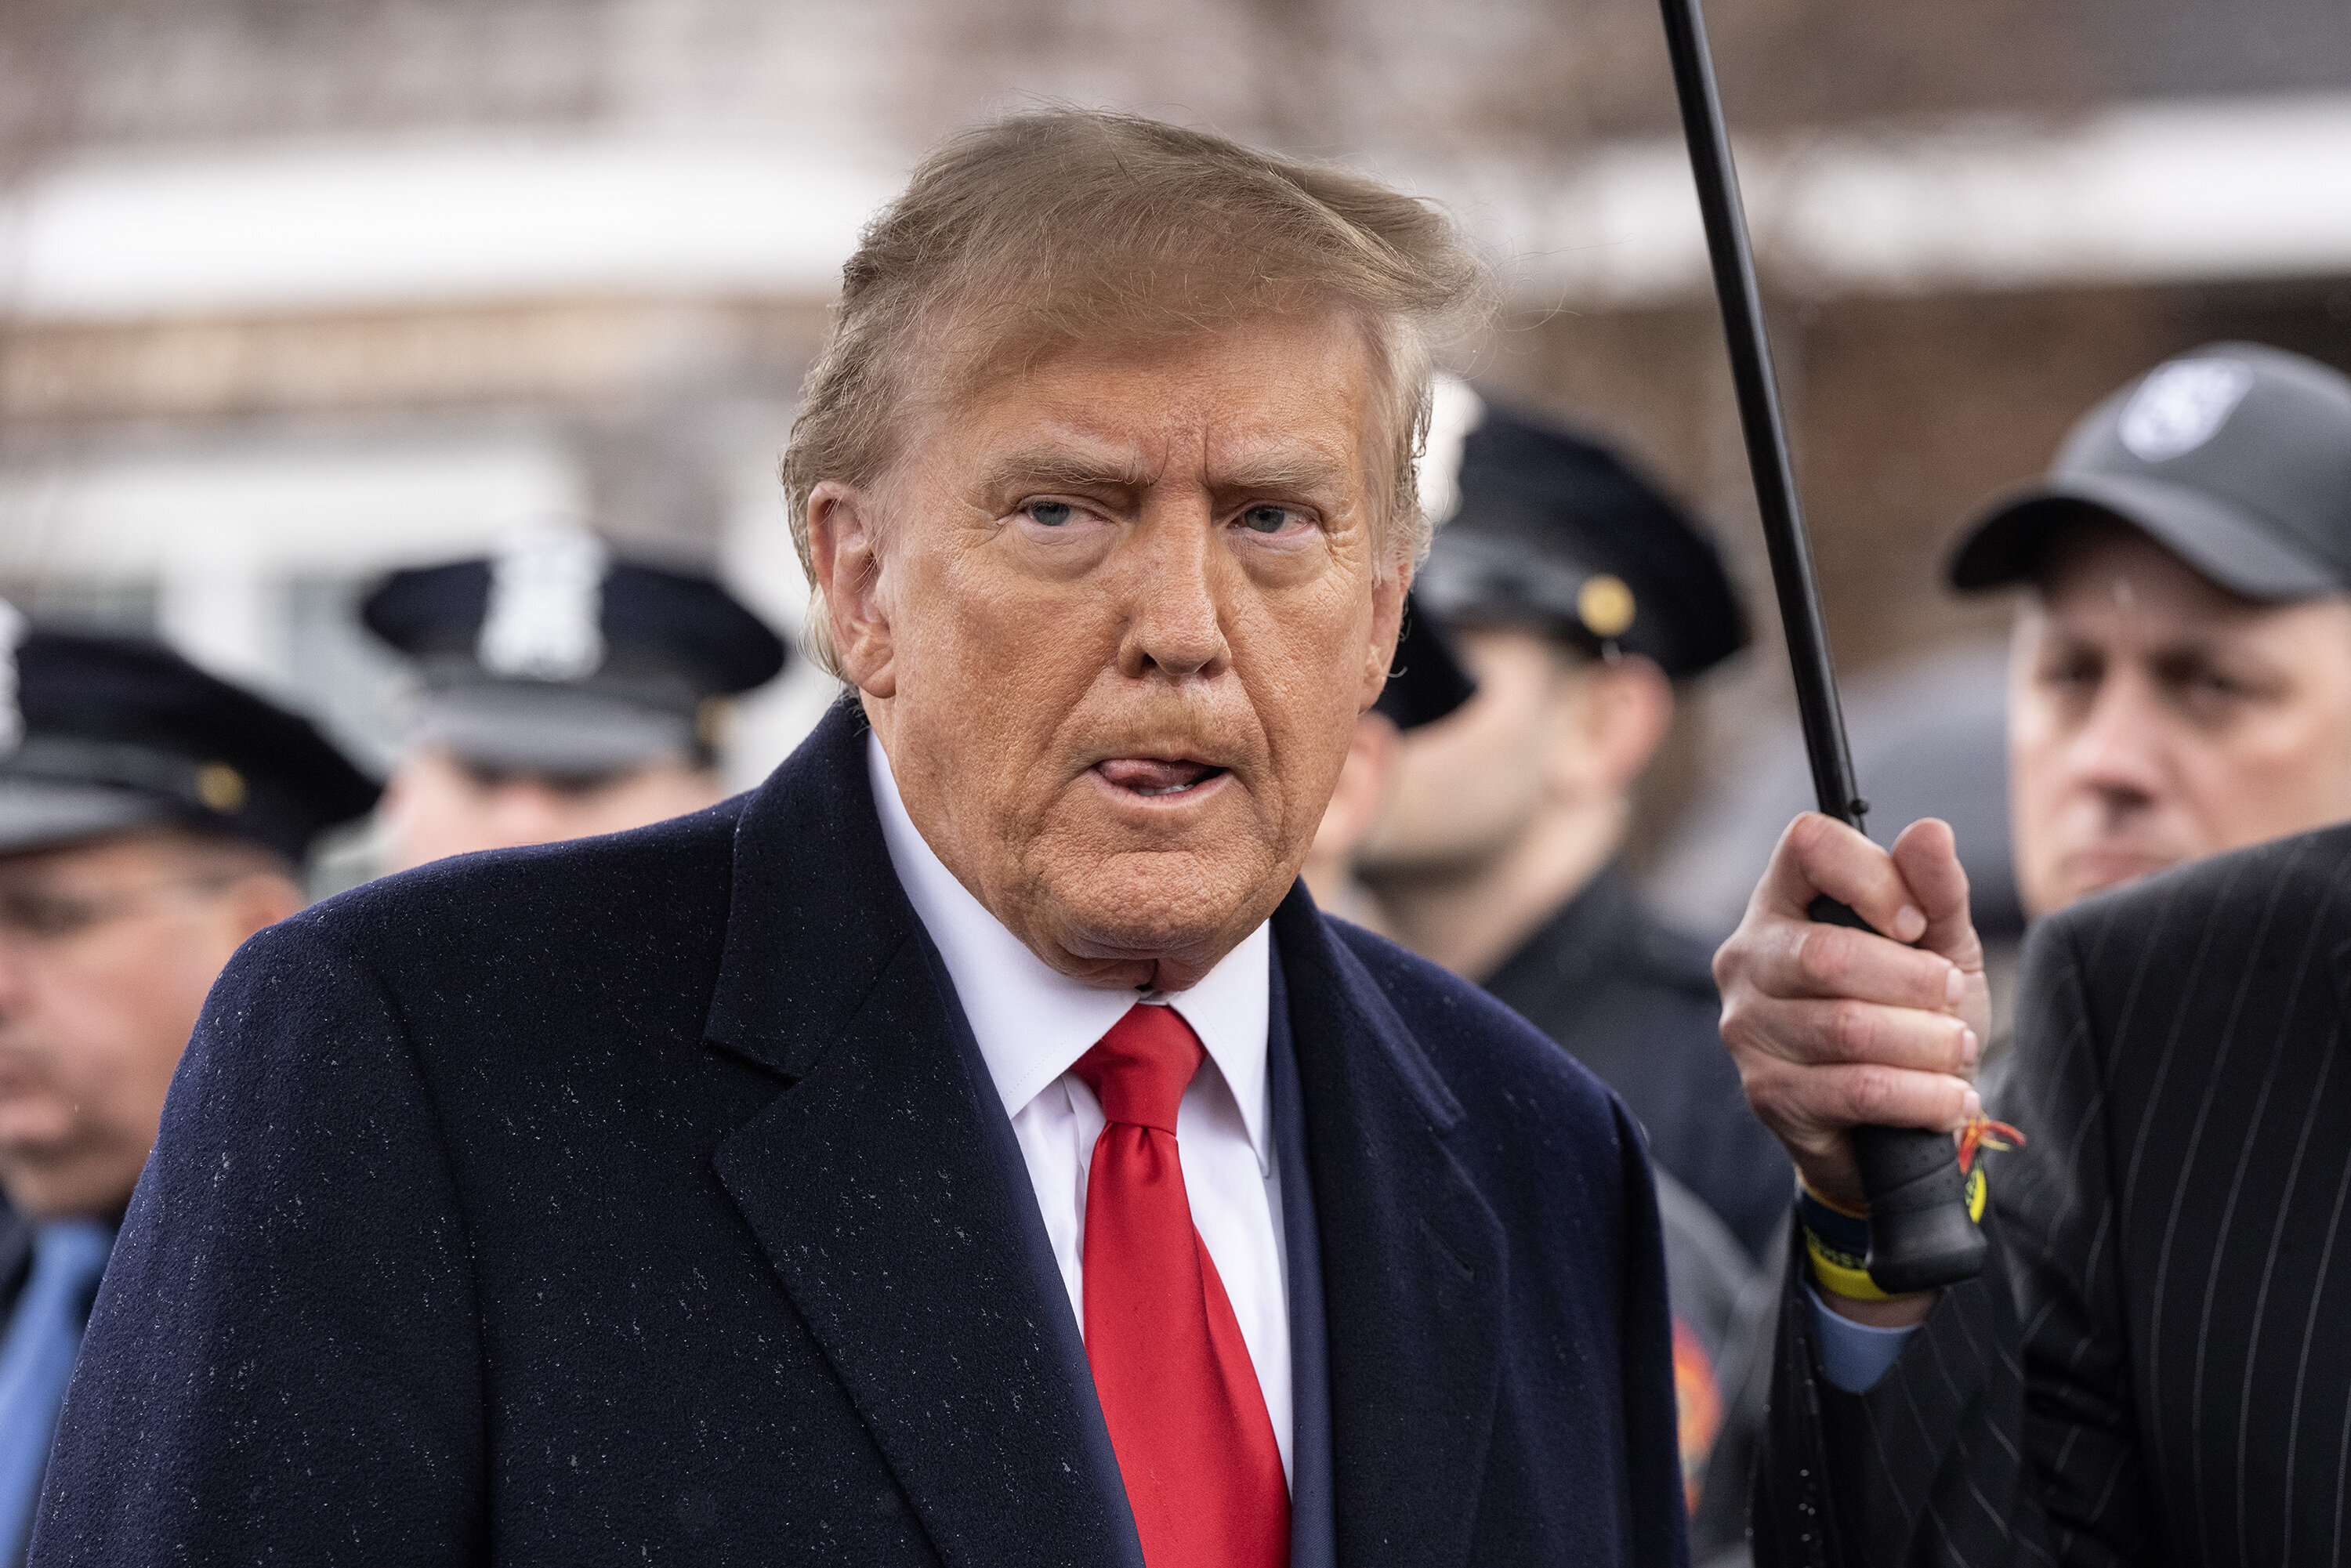 Former President Donald Trump faces an expanded gag order in the Manhattan hush money case that's set to go to trial on April 15.